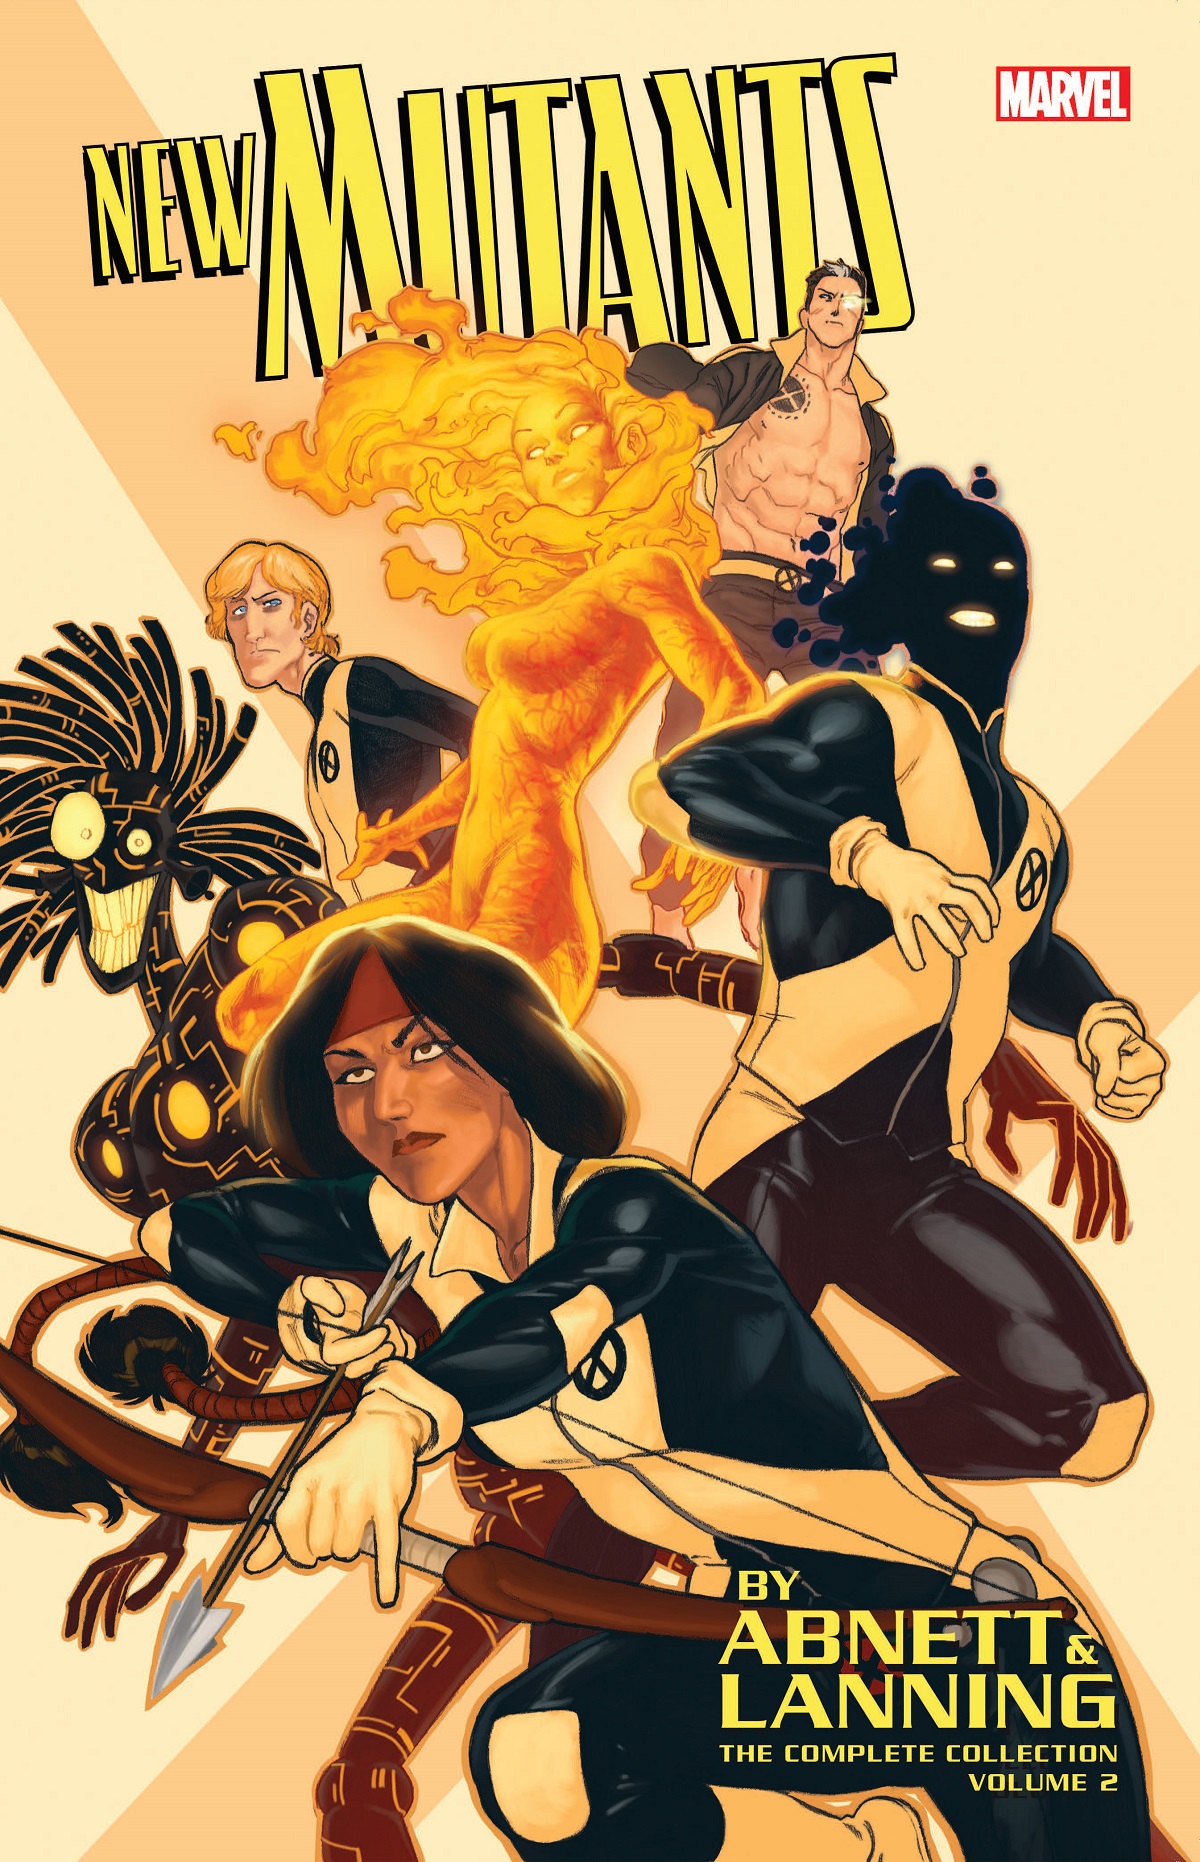 New Mutants by Abnett & Lanning: The Complete Collection Vol. 2 (Trade Paperback)